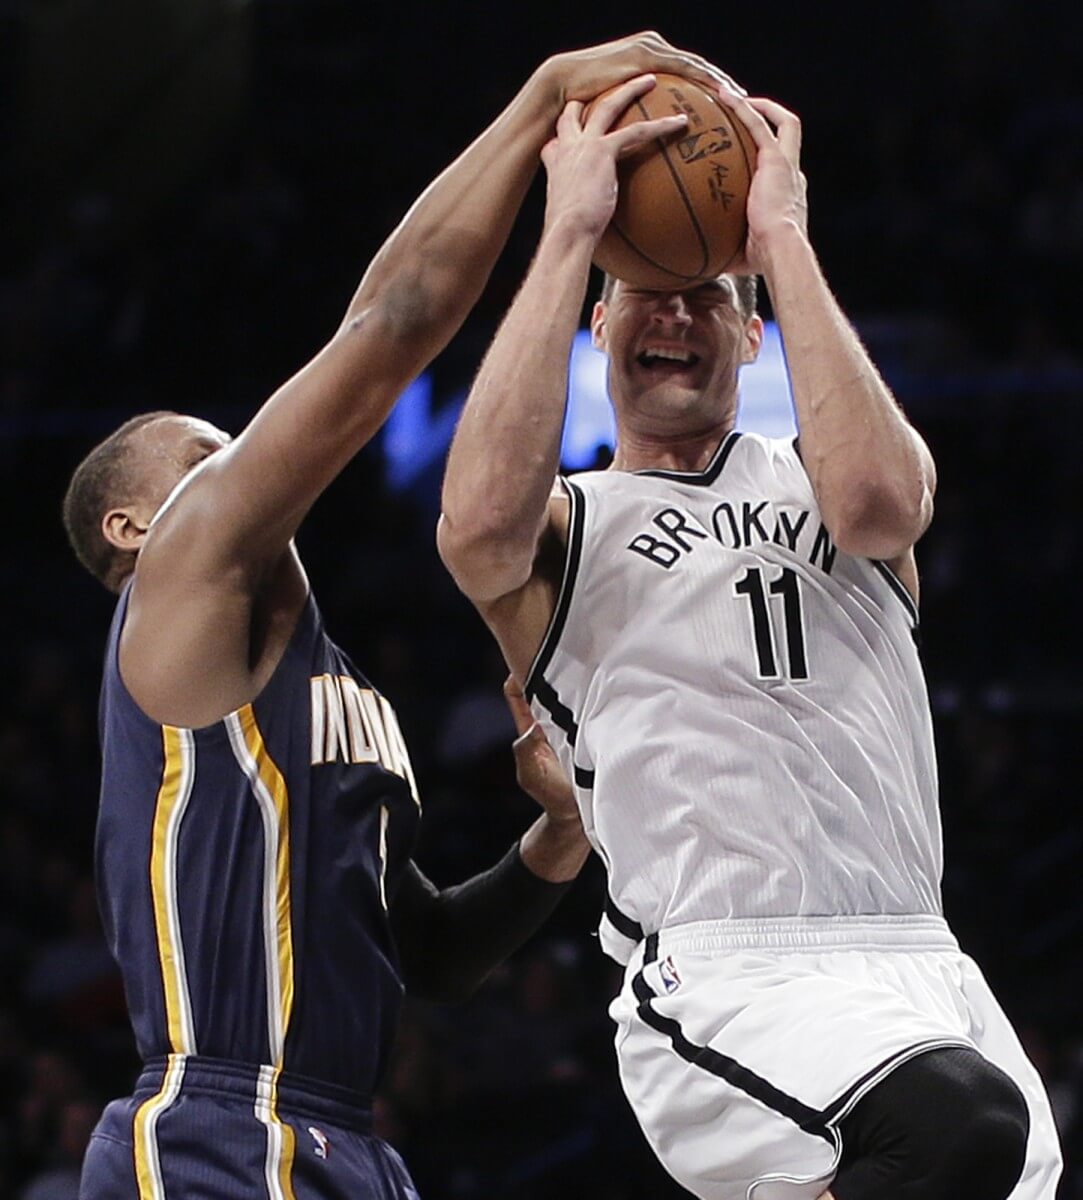 Indiana Pacers forward Lavoy Allen (5) blocks a shot attempt by Brooklyn Nets center Brook Lopez (11) during the second quarter of an NBA basketball game Wednesday, Feb. 3, 2016, in New York. (AP Photo/Julie Jacobson)